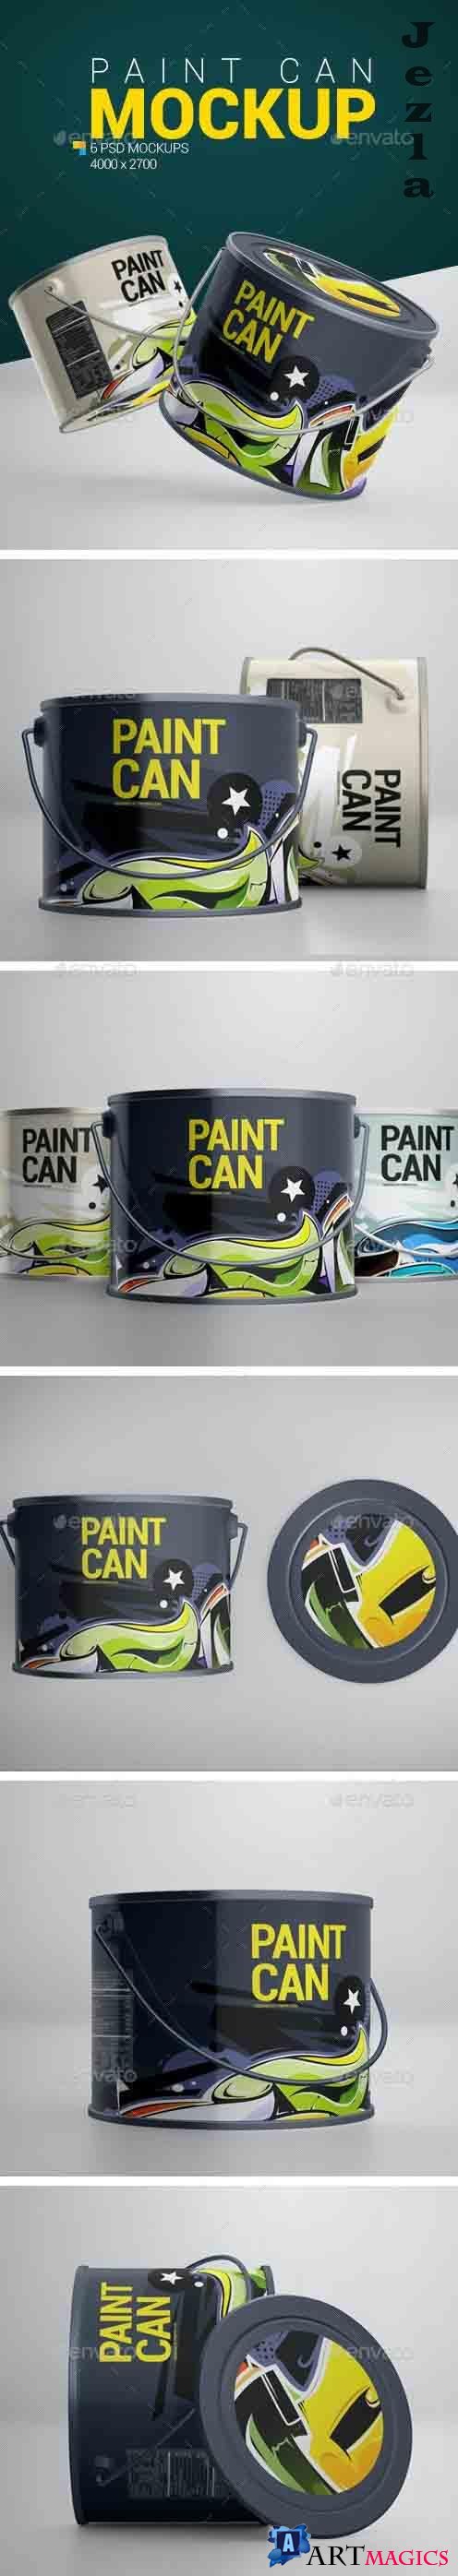 Paint Can Mockup - 24080082